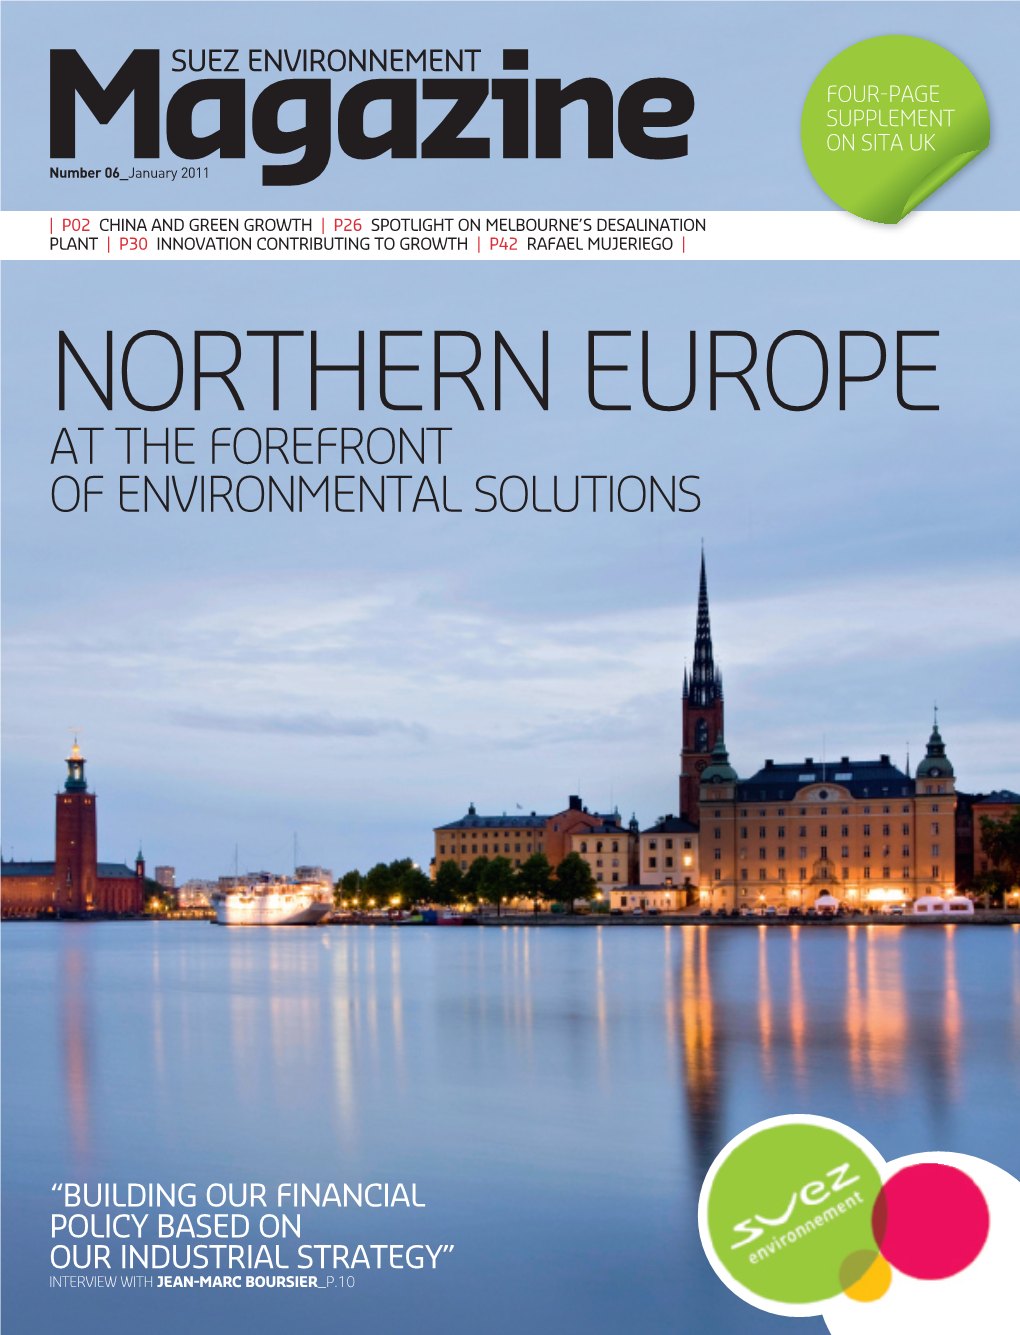 Northern Europe at the Forefront of Environmental Solutions